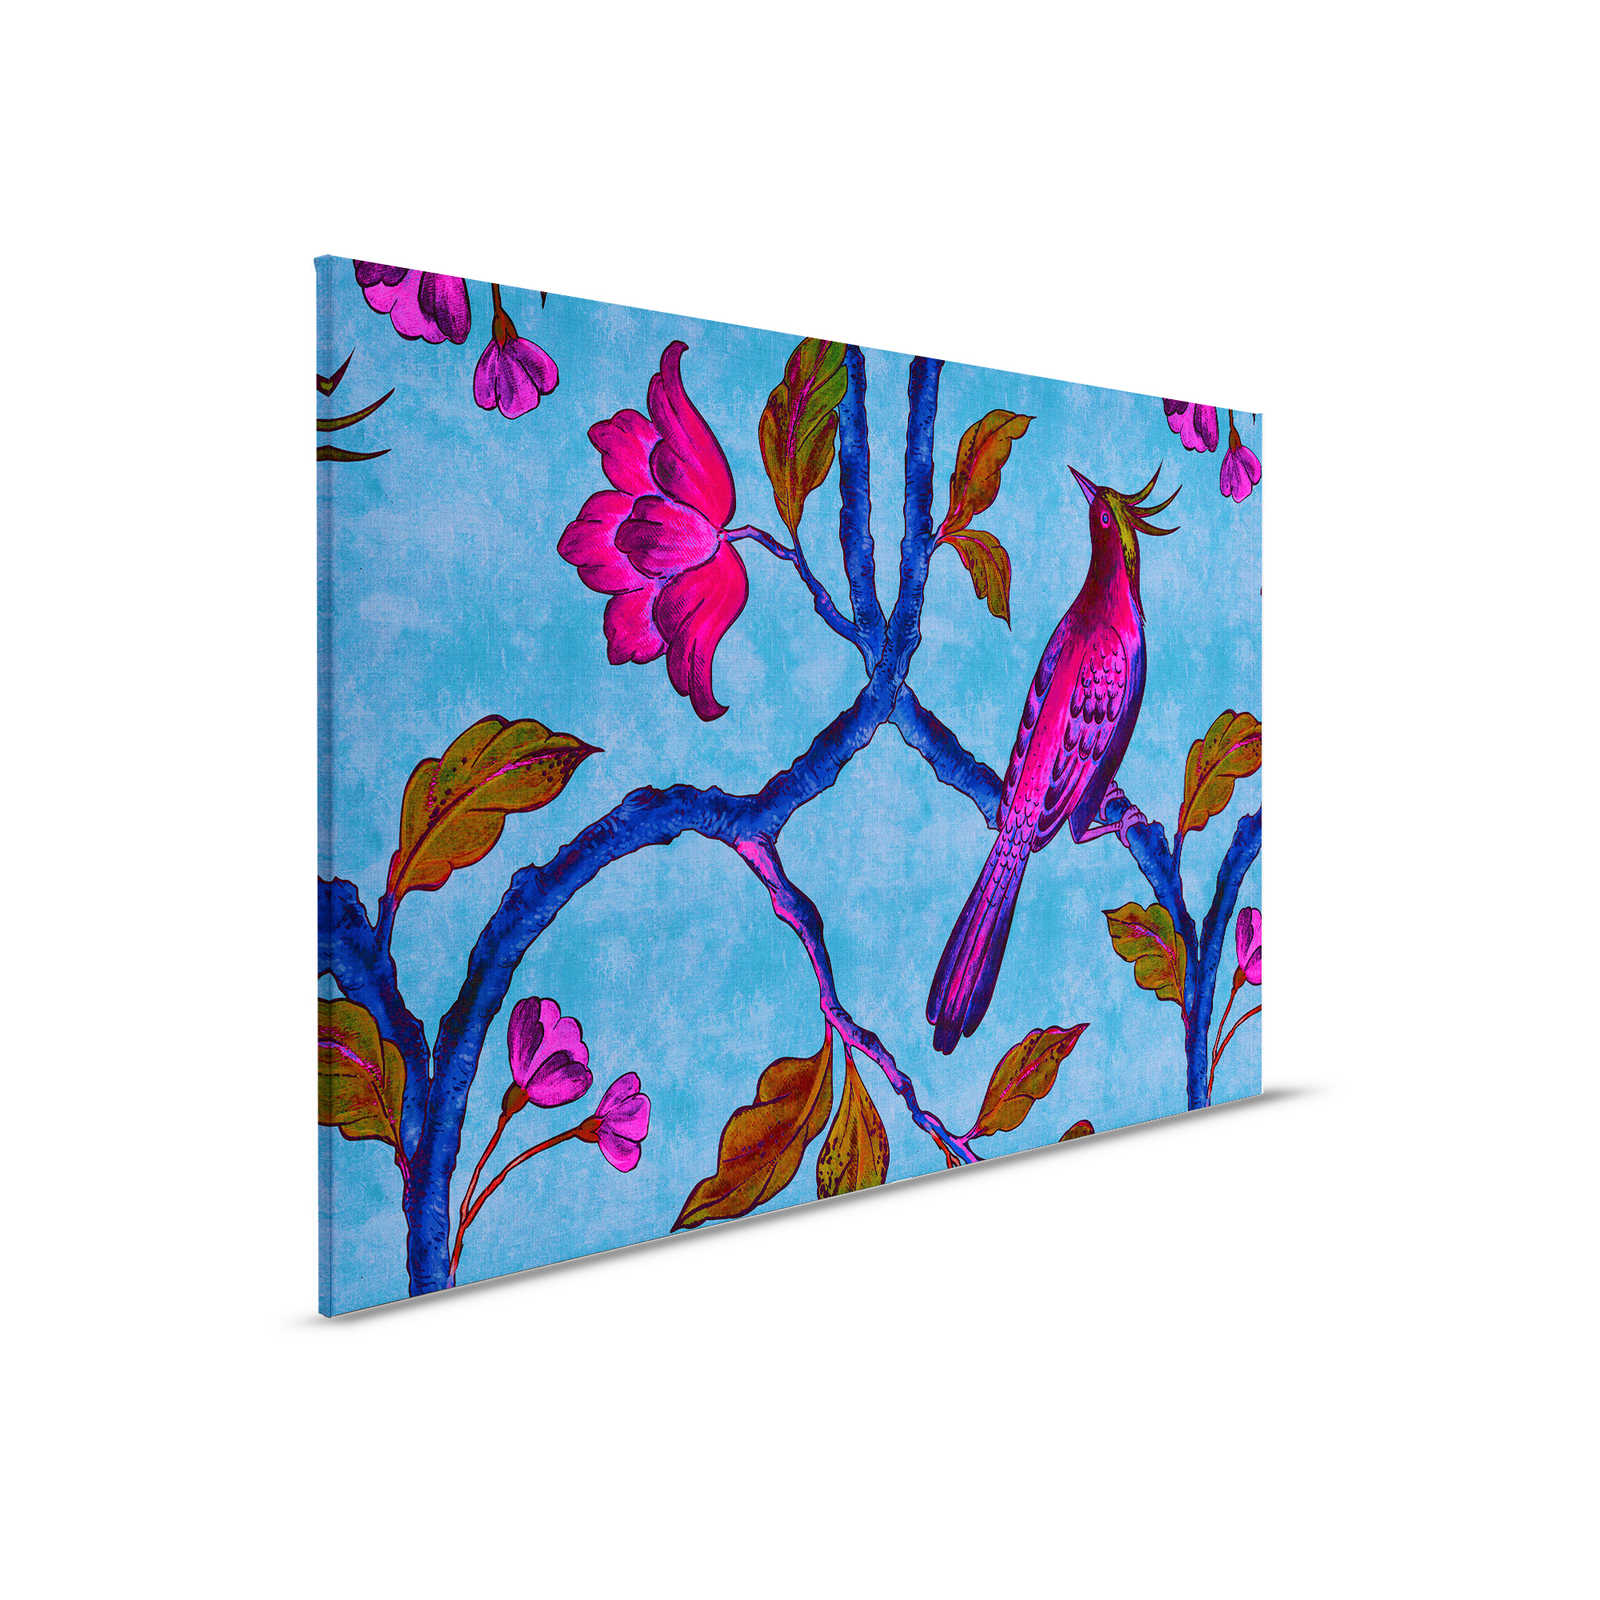         Bird Of Paradis 1 - Canvas painting in natural linen structure with bird of paradise - 0.90 m x 0.60 m
    